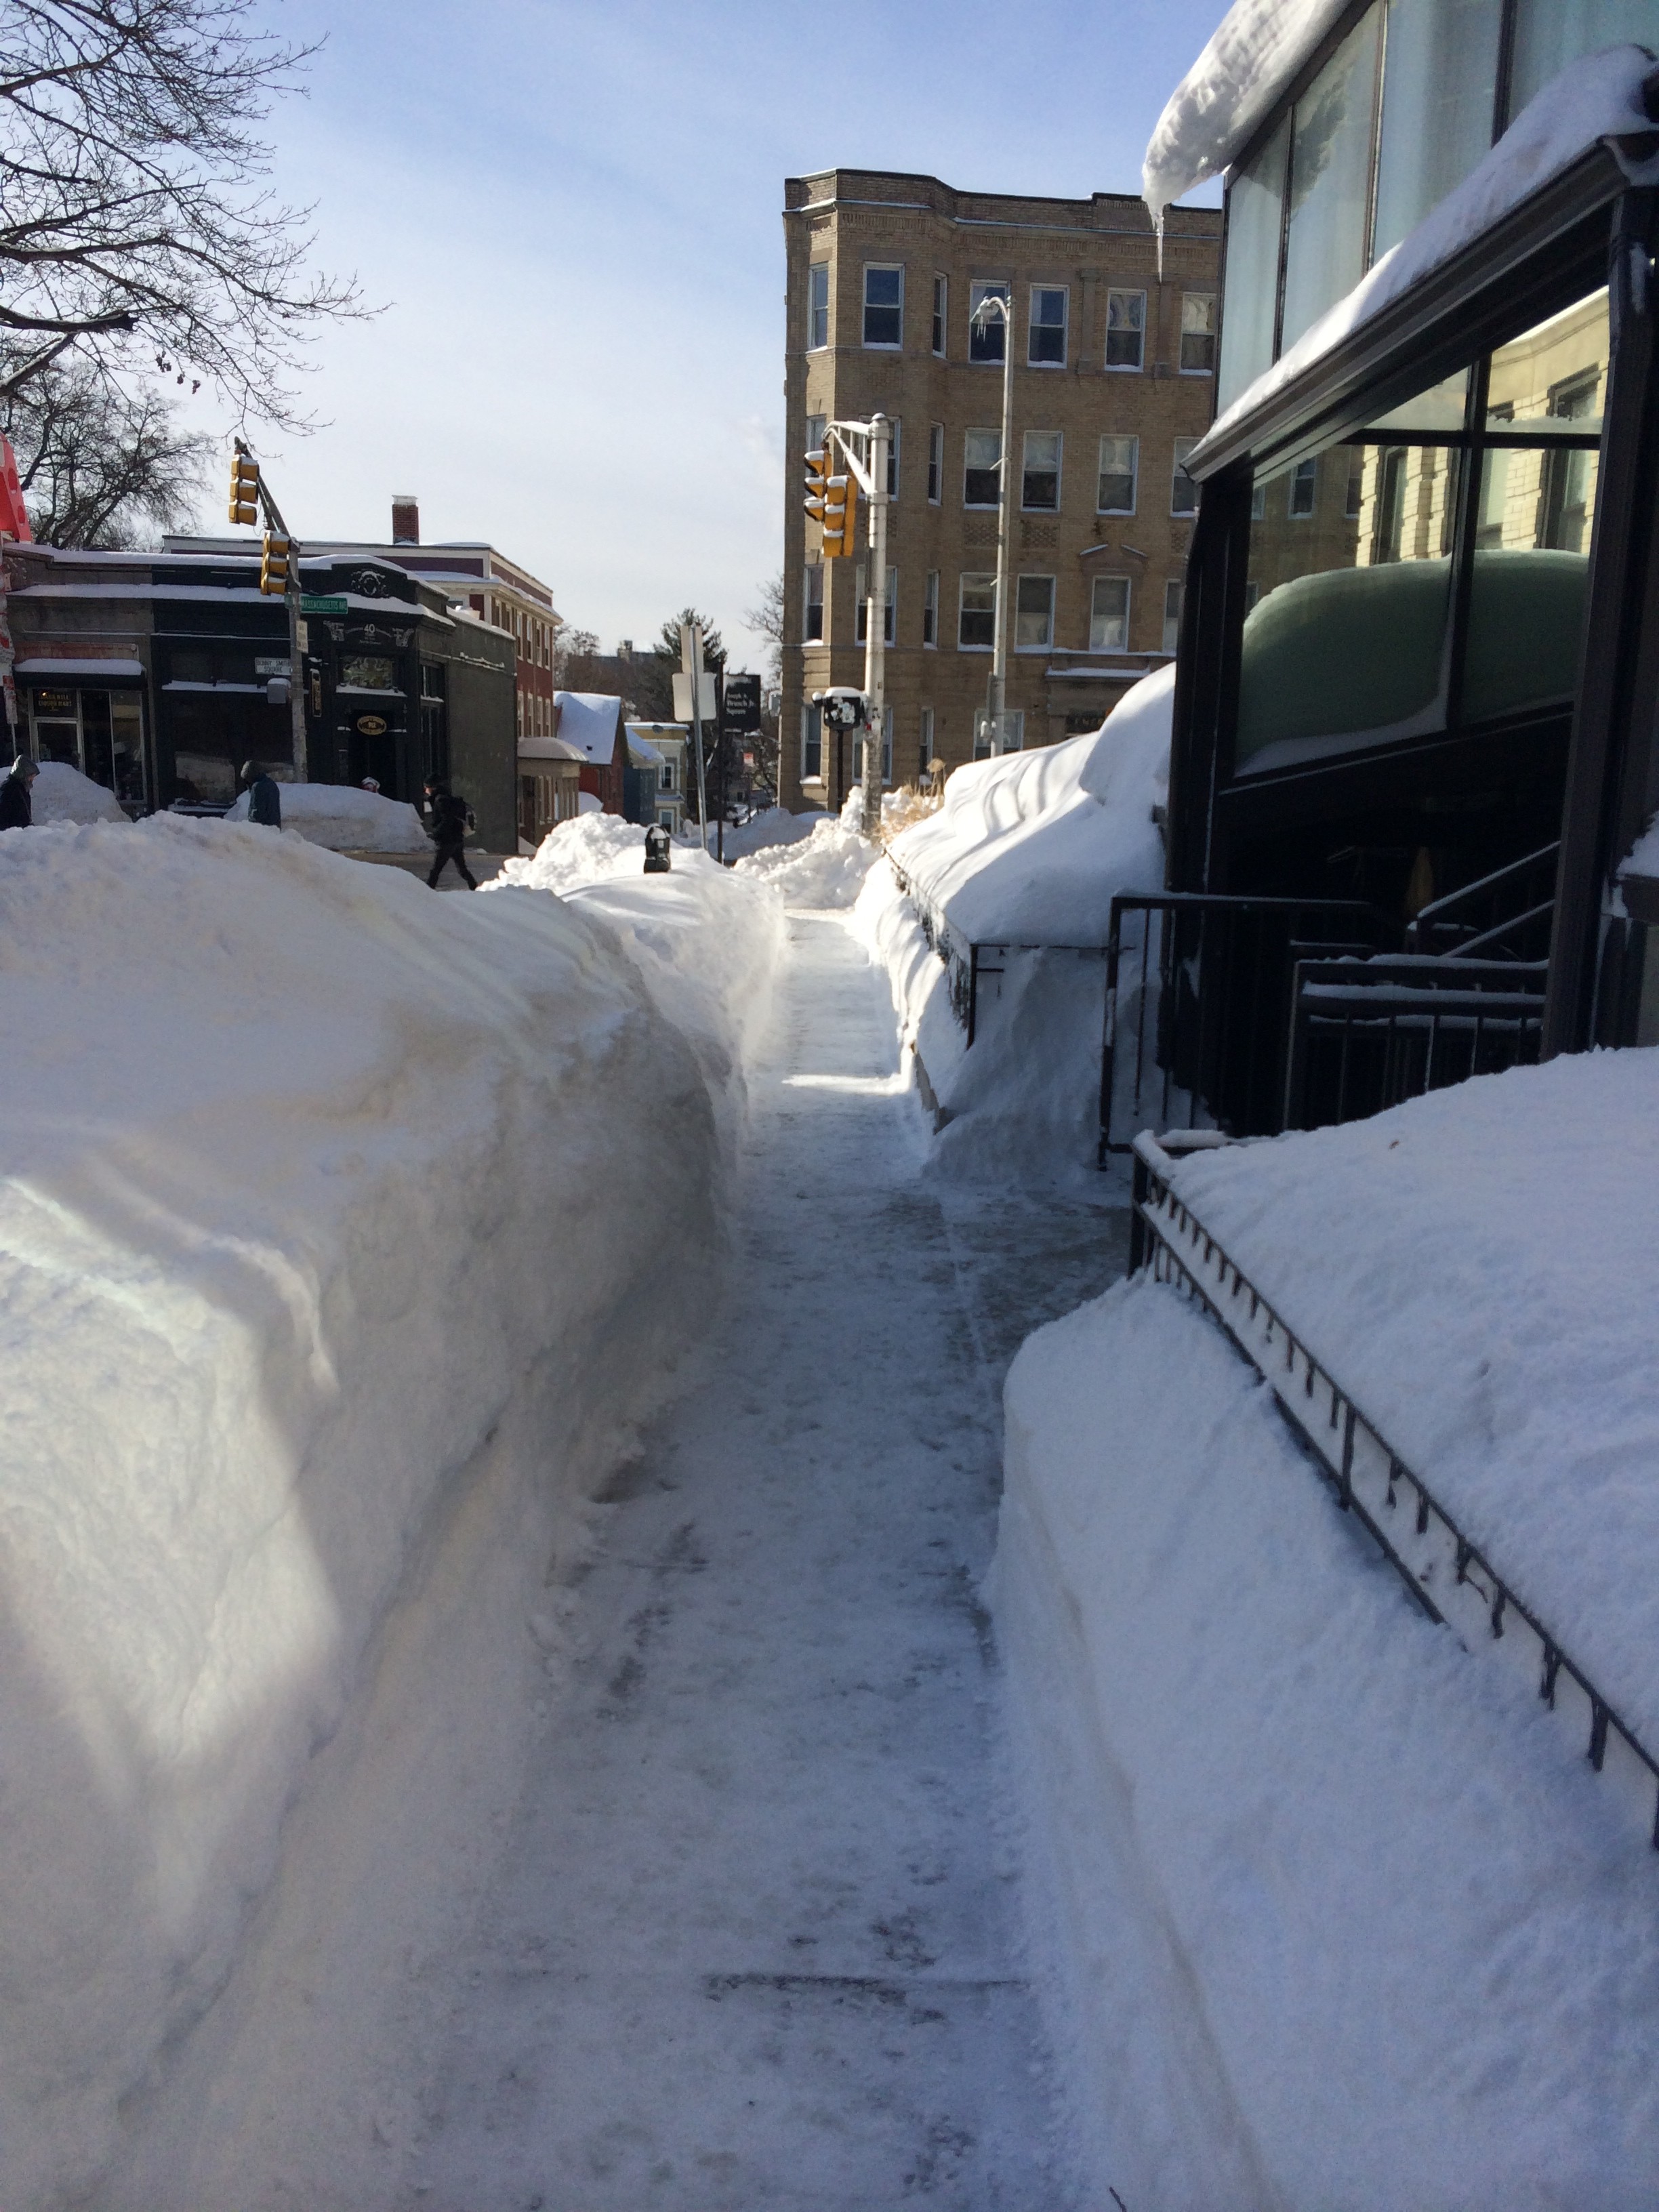 Most of the sidewalks were already cleared